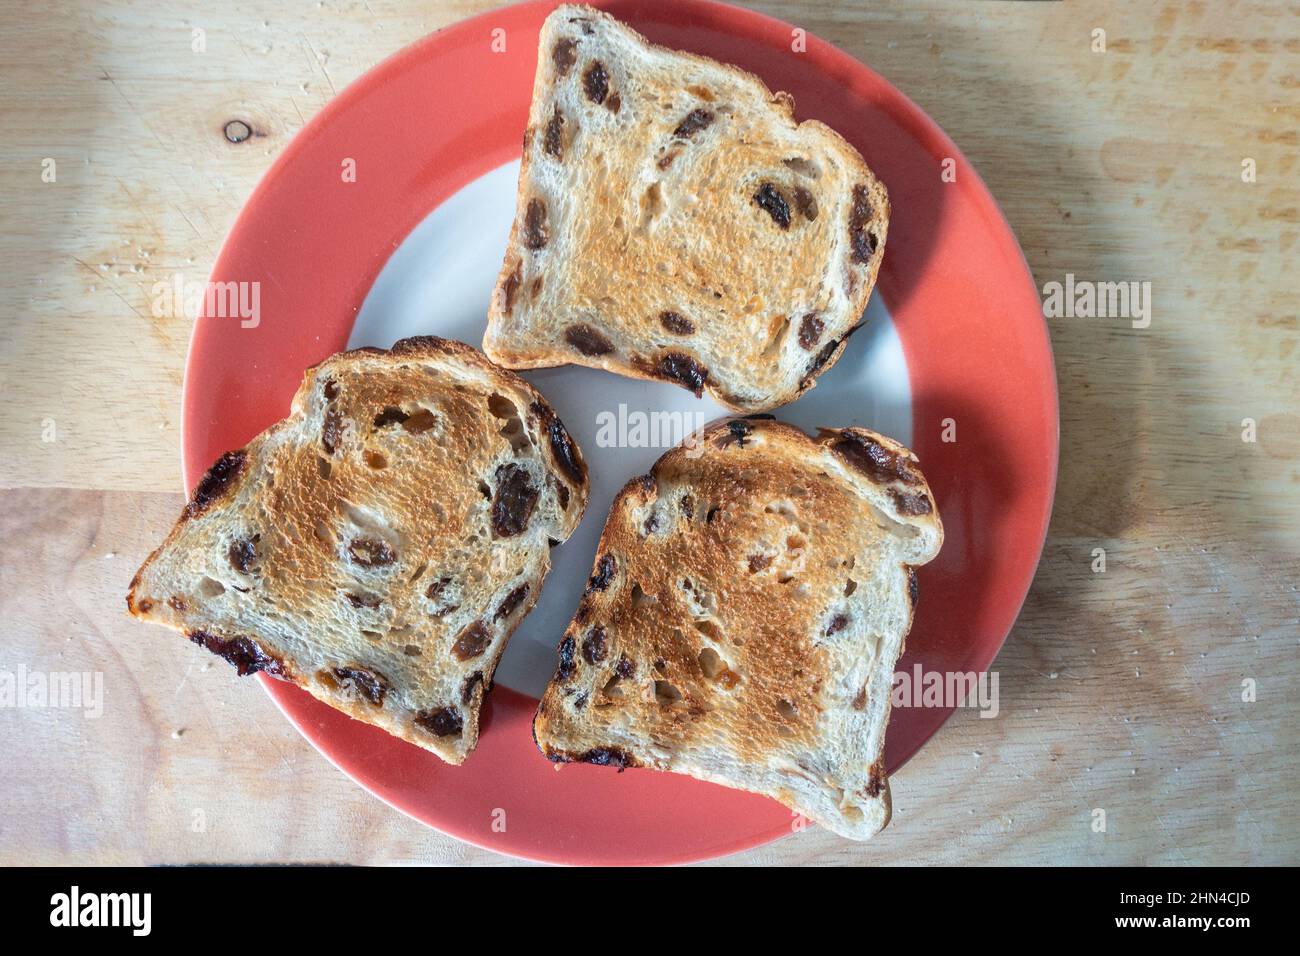 Toasted fruit loaf on a plate is comfort food eaten for breakfast or as tasty snack. Stock Photo